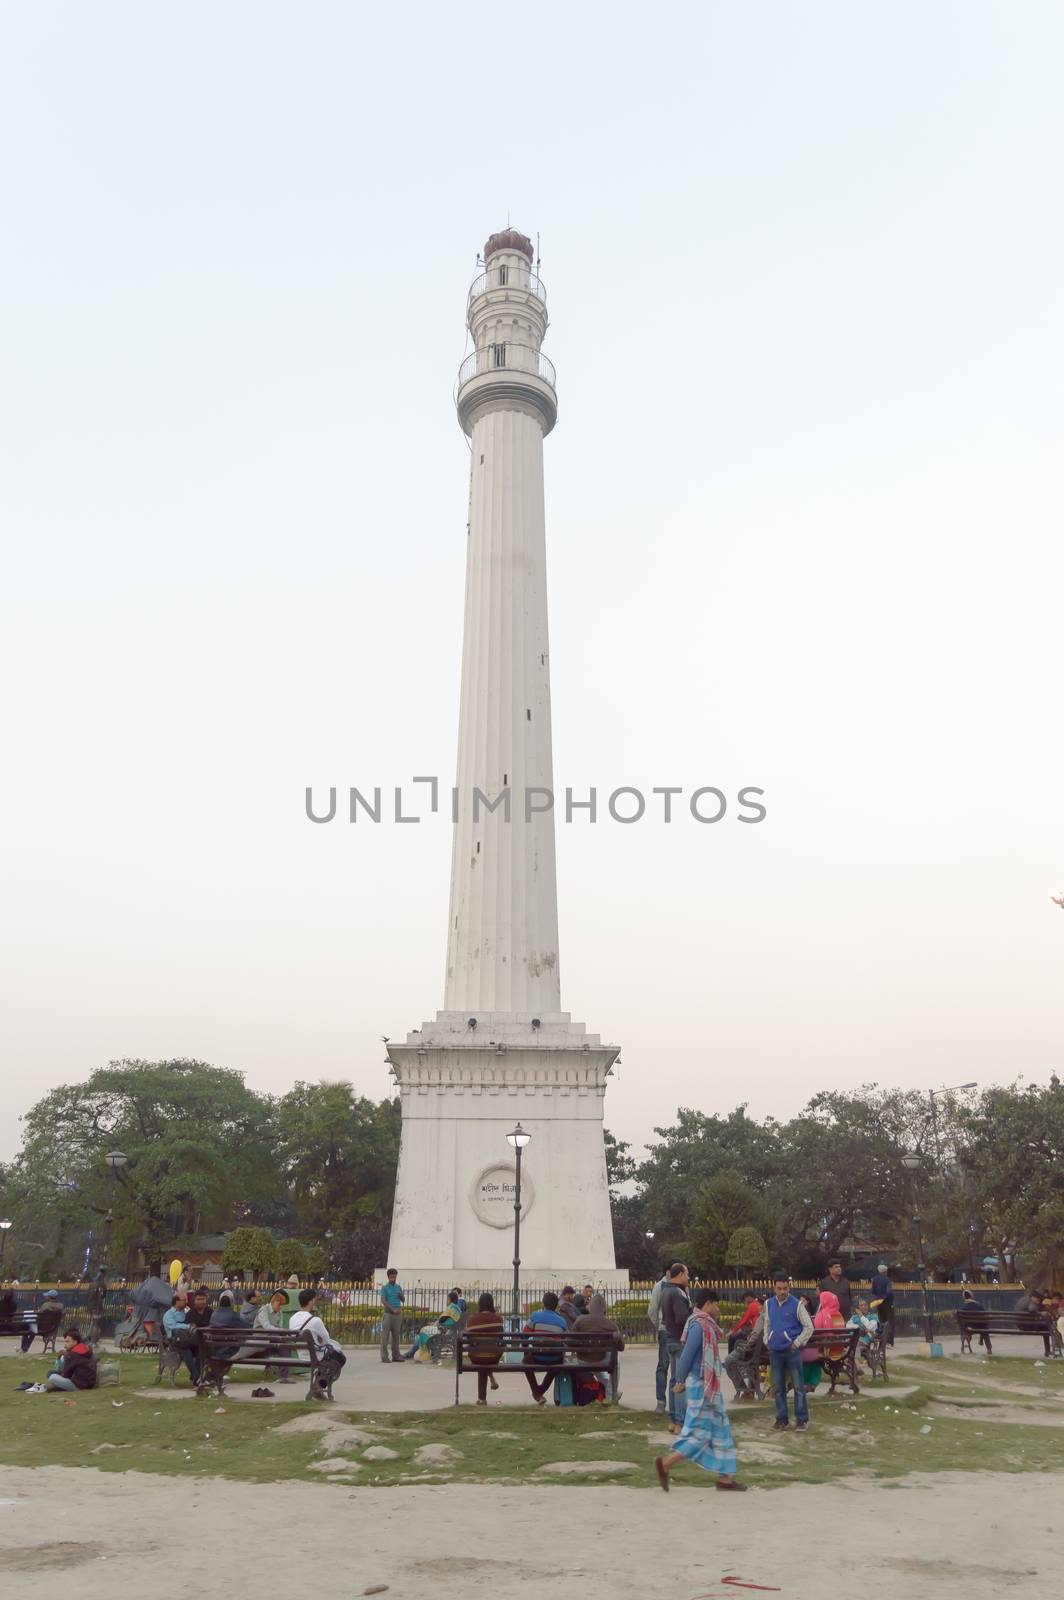 Shaheed Minar Martyrs Ochterlony Monument, famous pillar minaret architectural column lighthouse representing memory British East India Company victory over Nepalese War, Kolkata West Bengal May 2019. by sudiptabhowmick